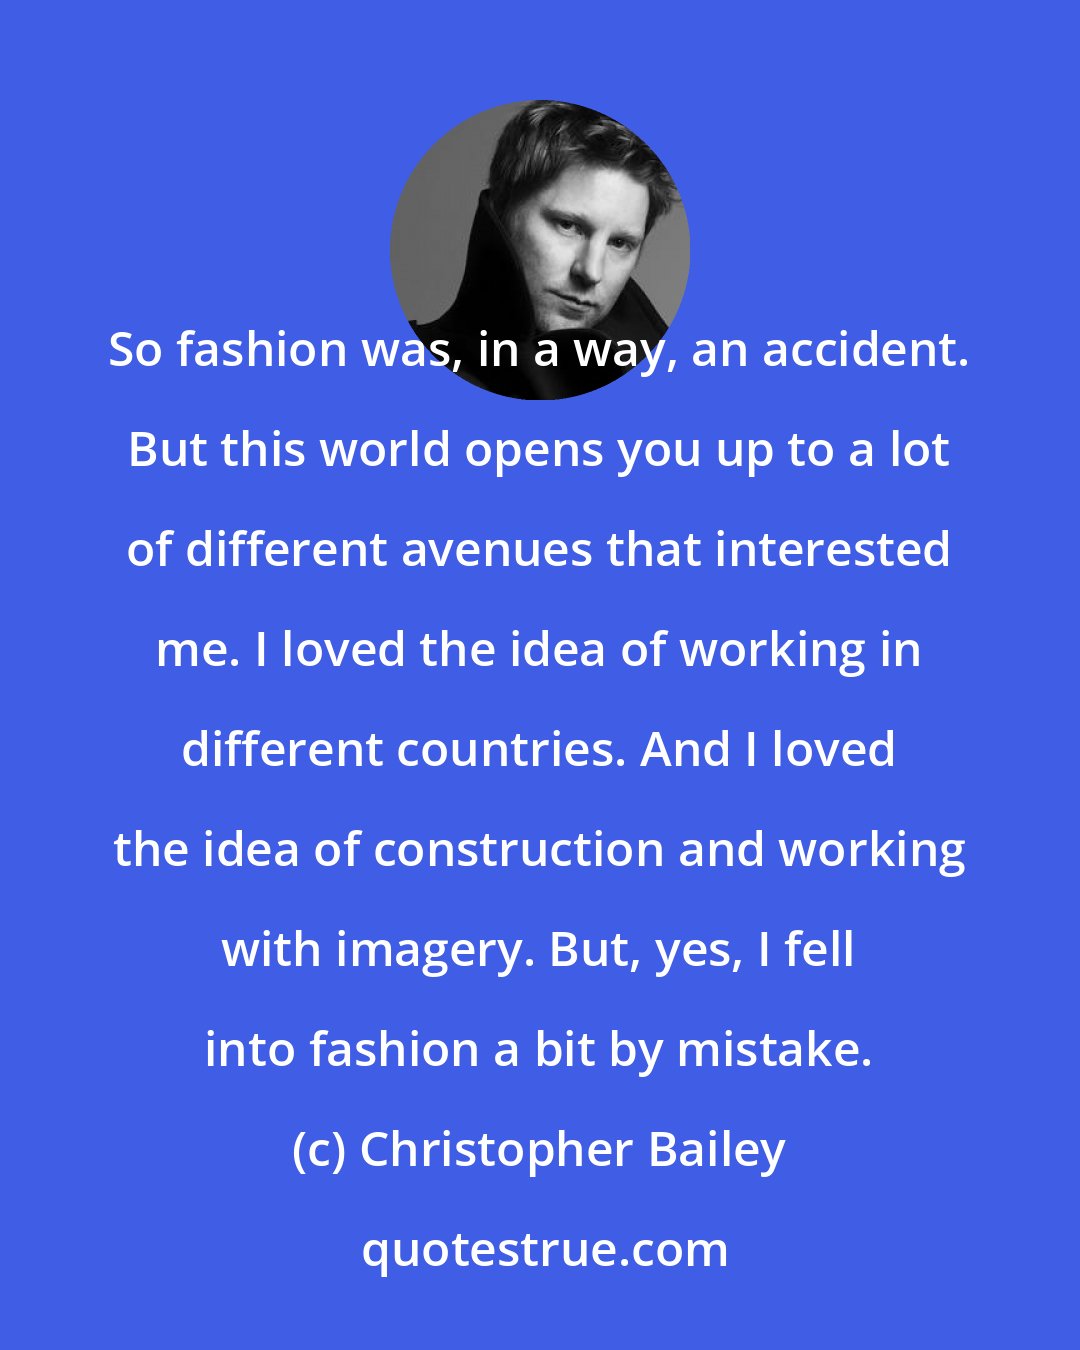 Christopher Bailey: So fashion was, in a way, an accident. But this world opens you up to a lot of different avenues that interested me. I loved the idea of working in different countries. And I loved the idea of construction and working with imagery. But, yes, I fell into fashion a bit by mistake.